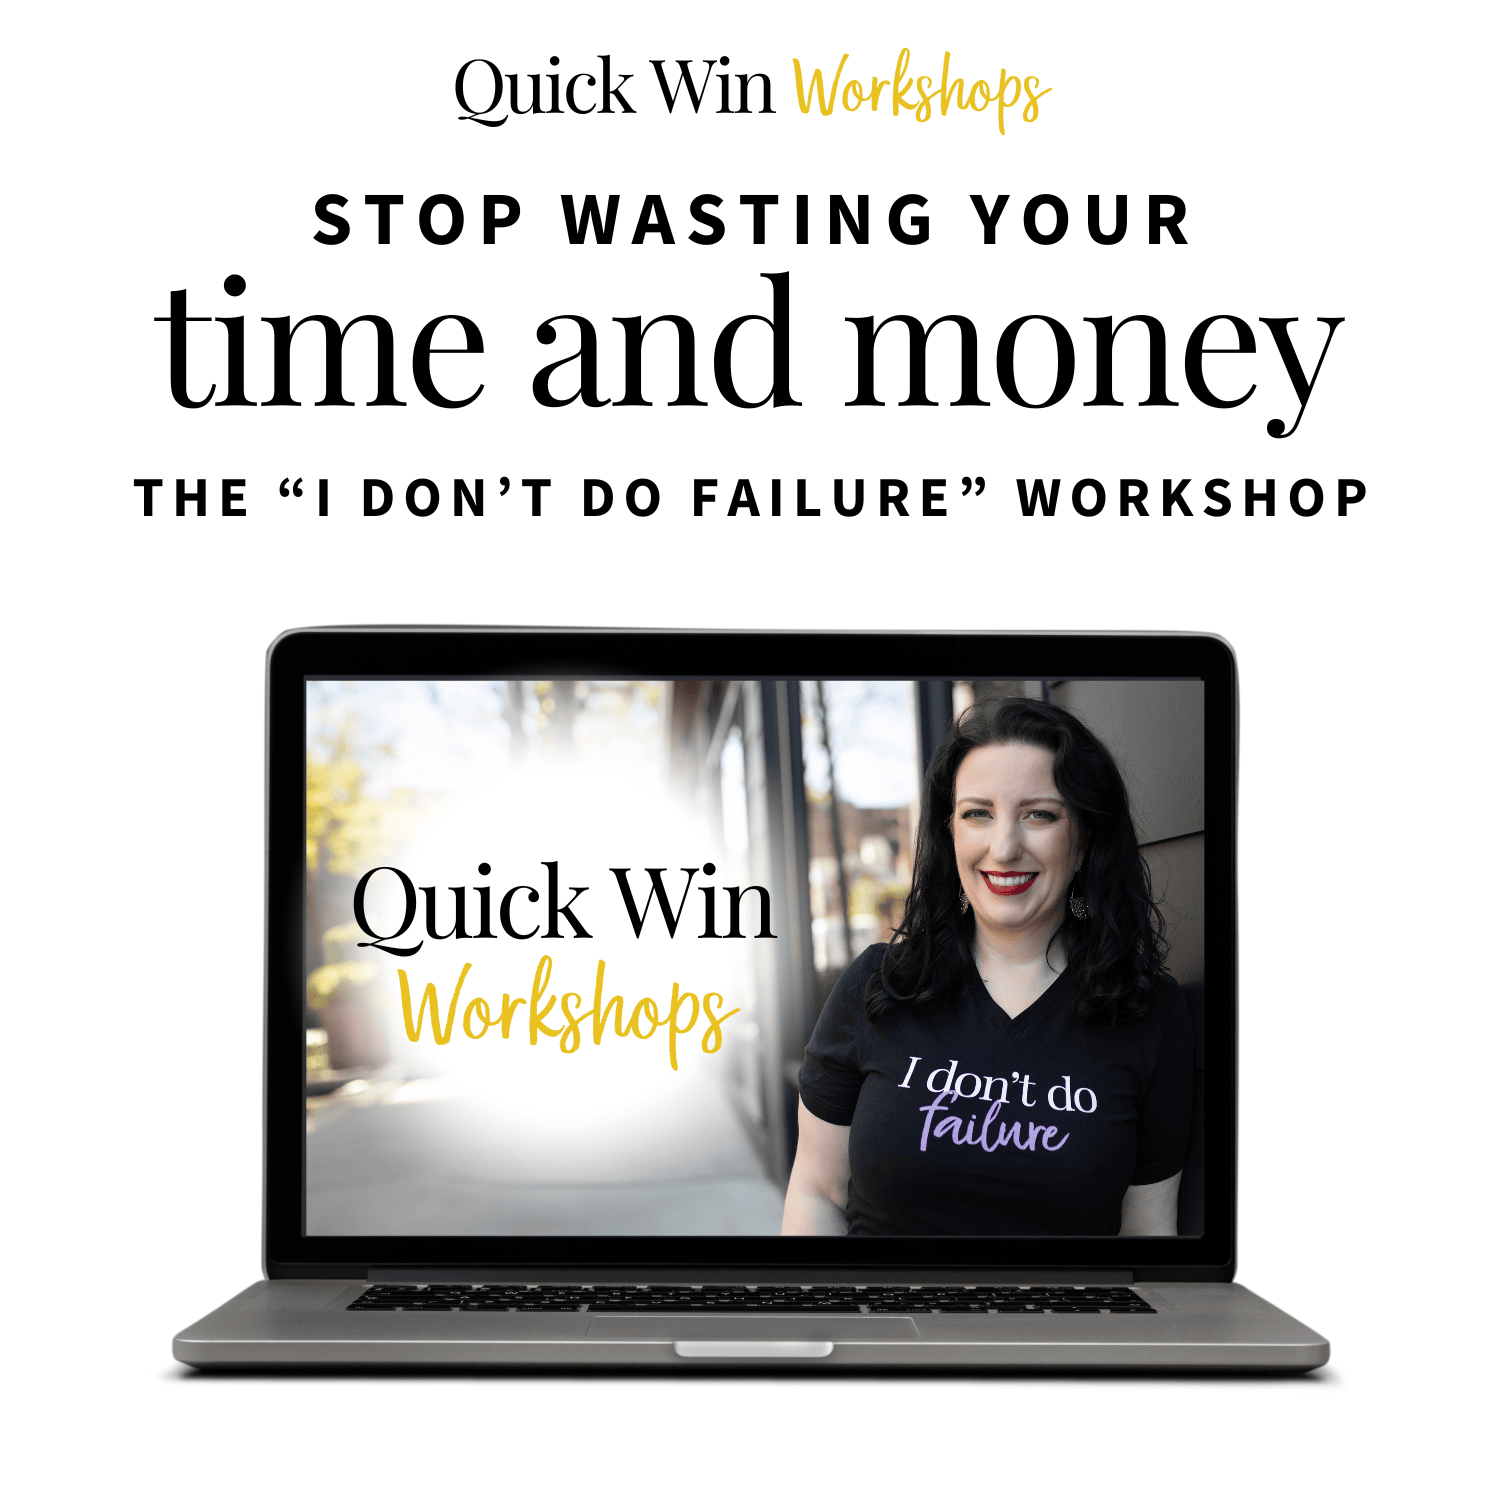 Quick Win Workshop: How to Stop Wasting Time and Find Money Making Minutes